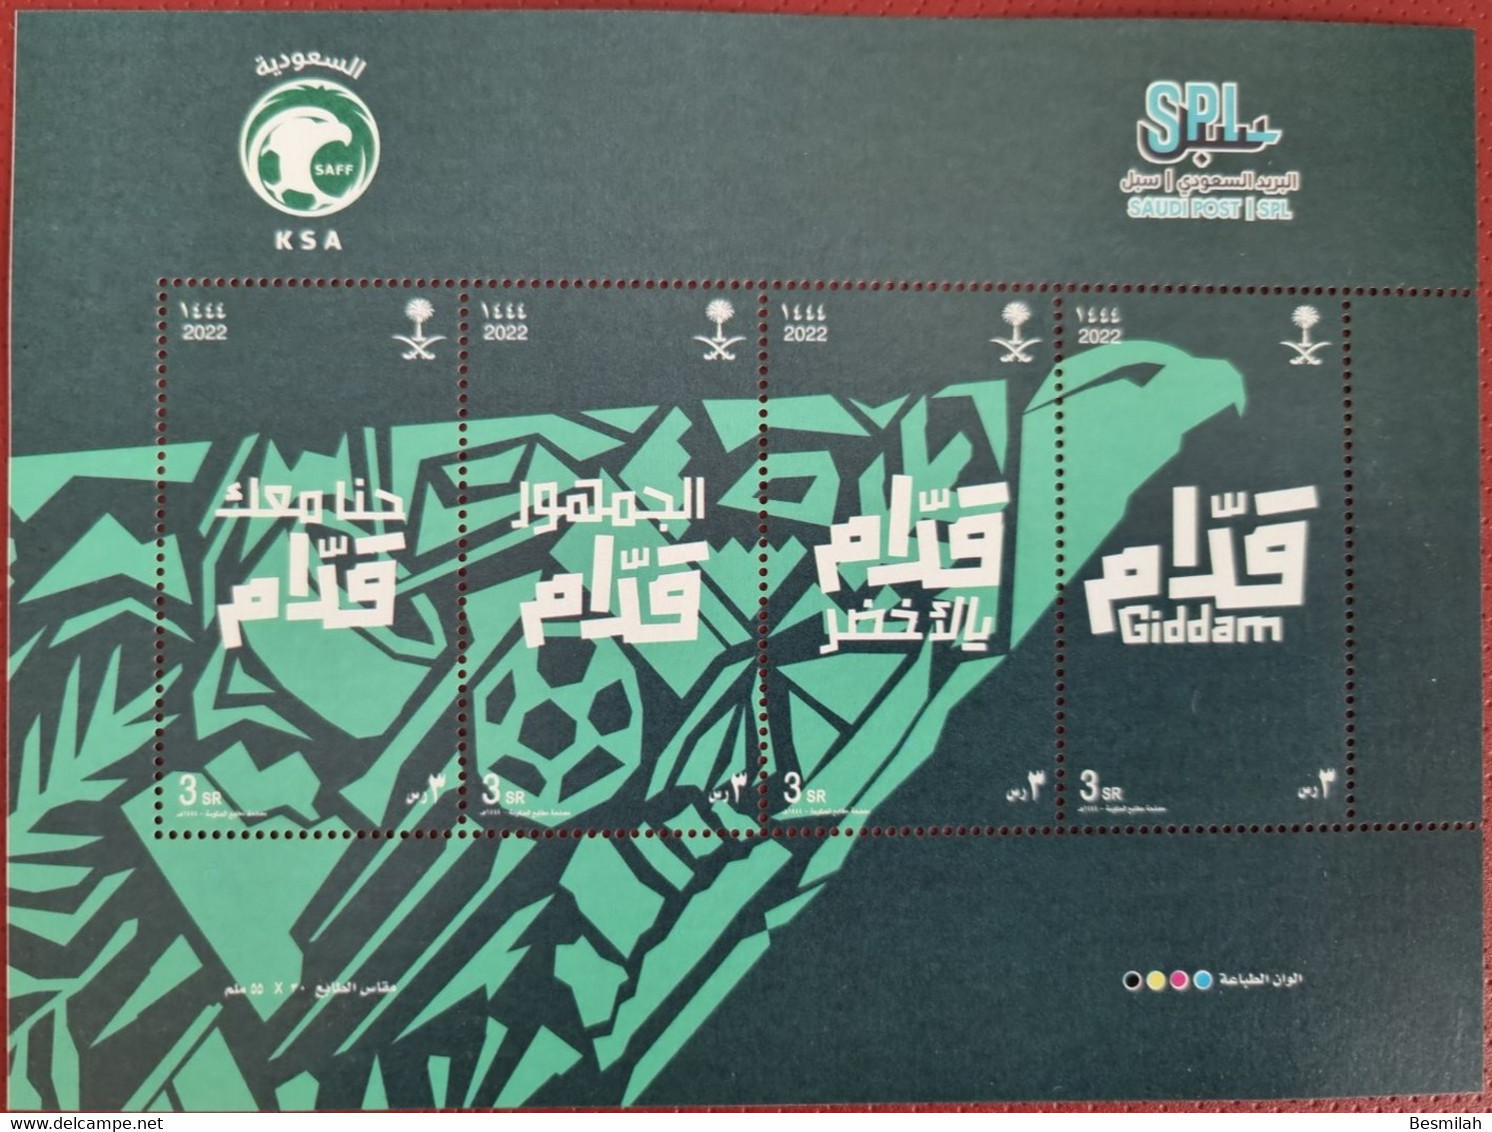 Saudi Arabia Stamp Giddam For Fifa 2022 (1444 Hijry) 8 Pieces Of 3 Riyals With 2 First Day Version Covers + Card - Arabie Saoudite